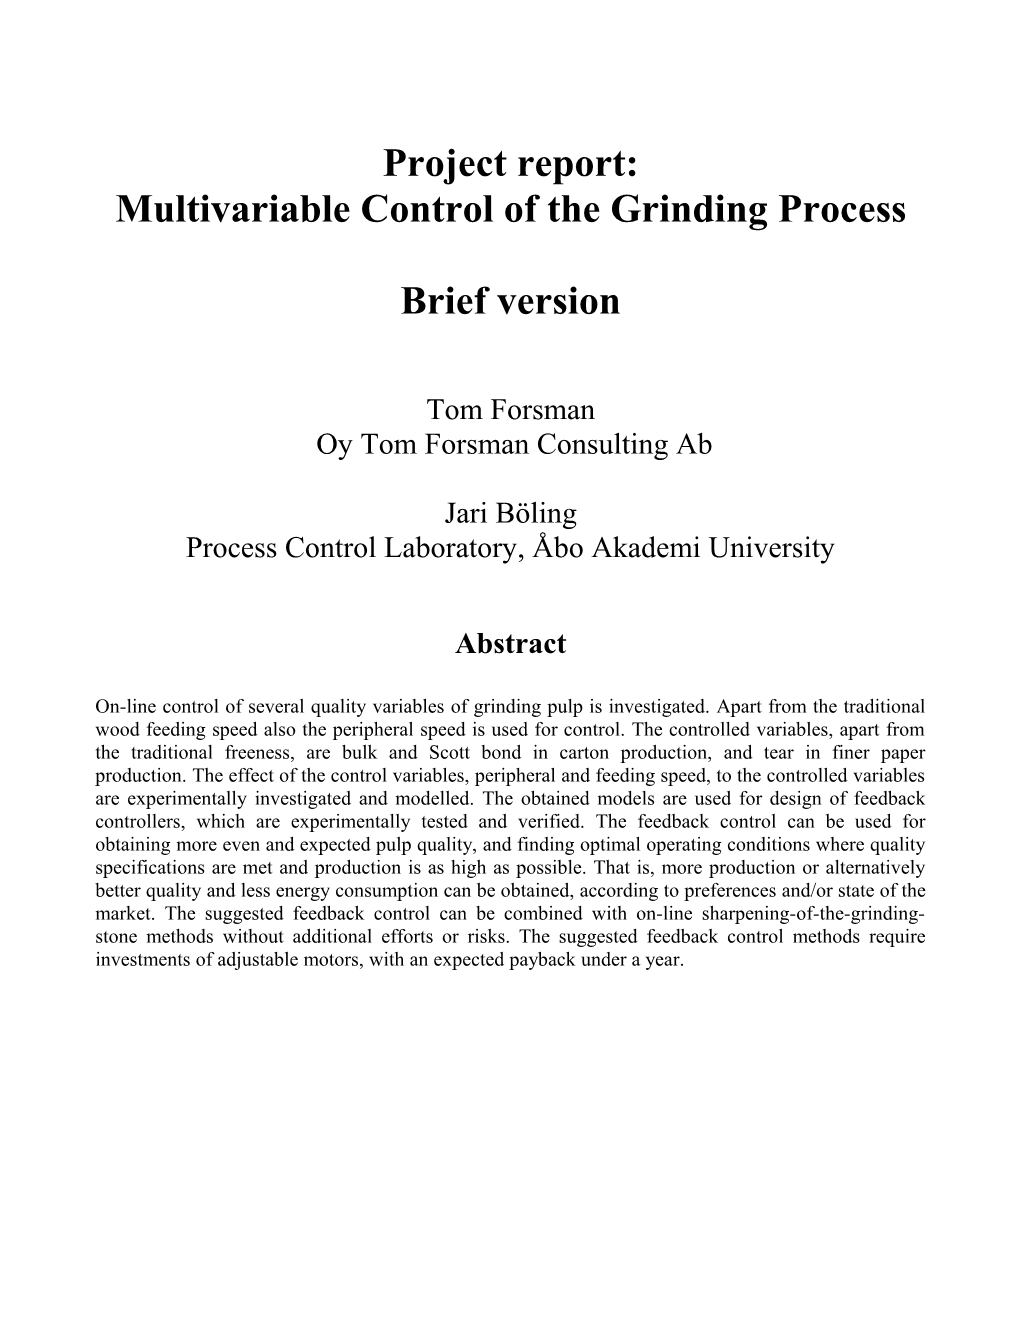 Multivariable Control of the Grinding Process